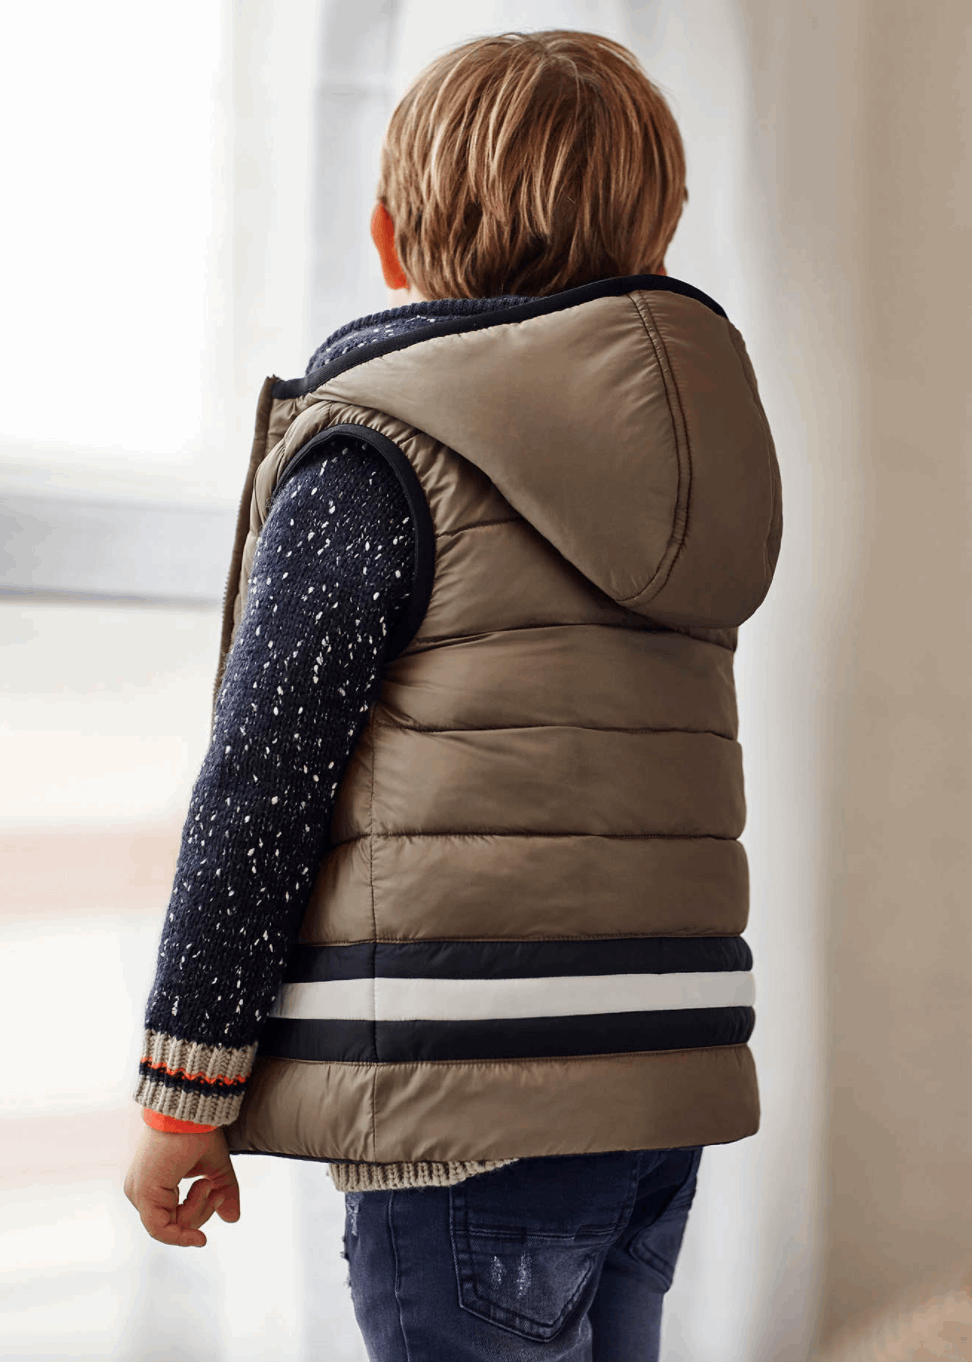 a boy is shown wearing a tan puffer vest with black and white stripes